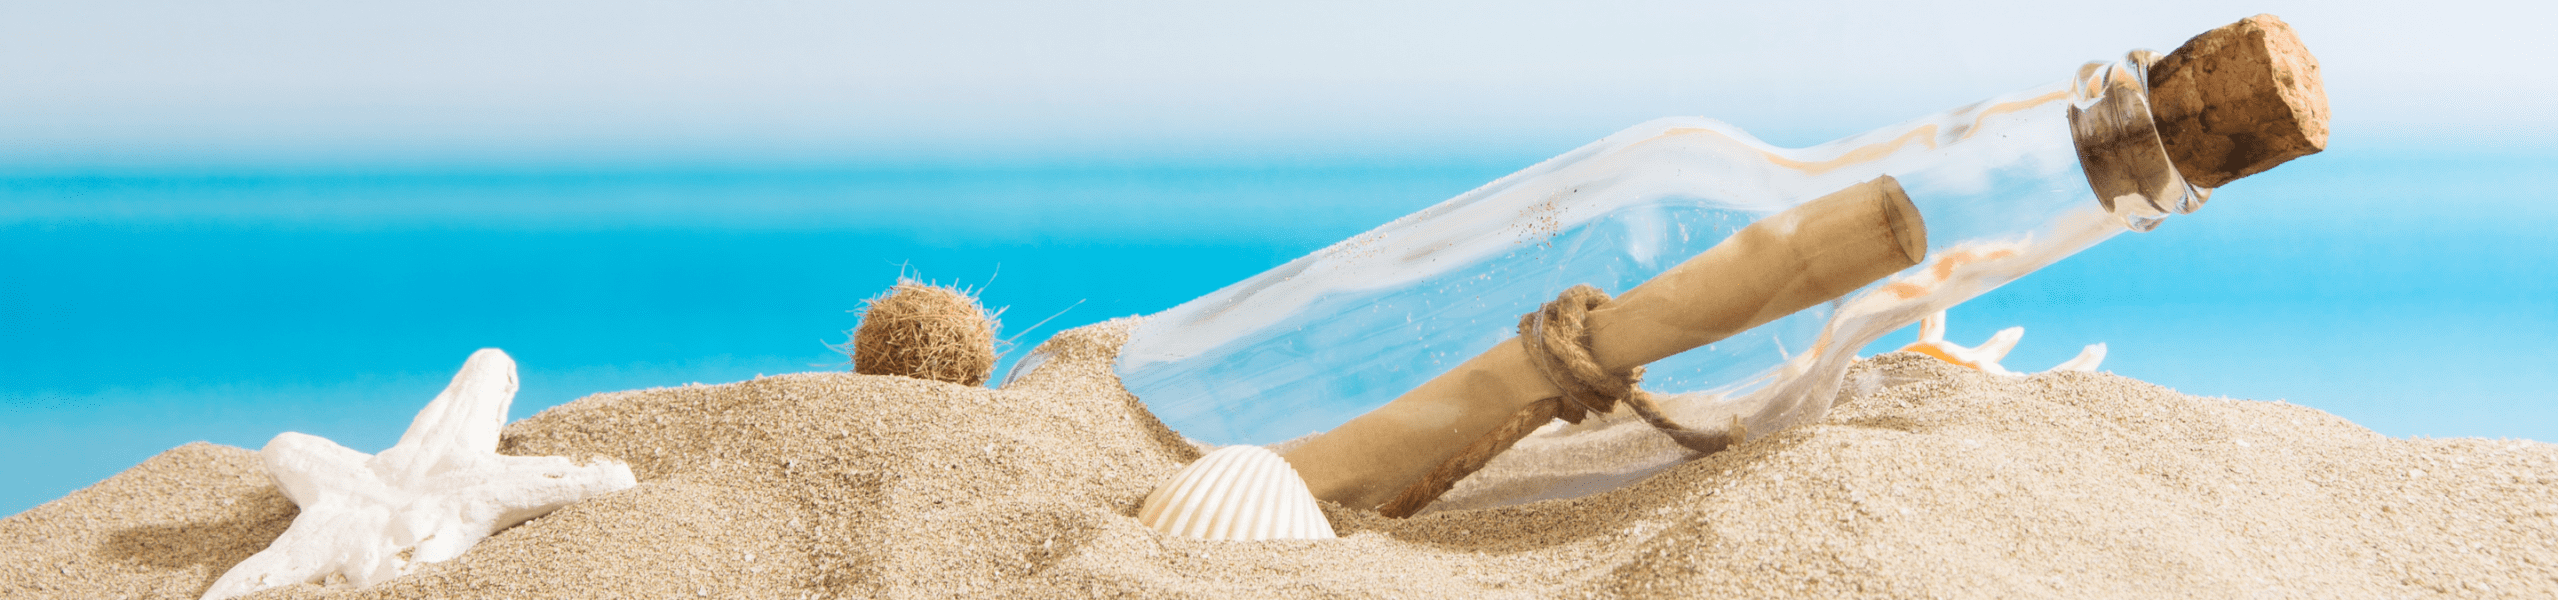 rolled piece of paper tied with string in a corked glass bottle surrounded by a few shells in the sand